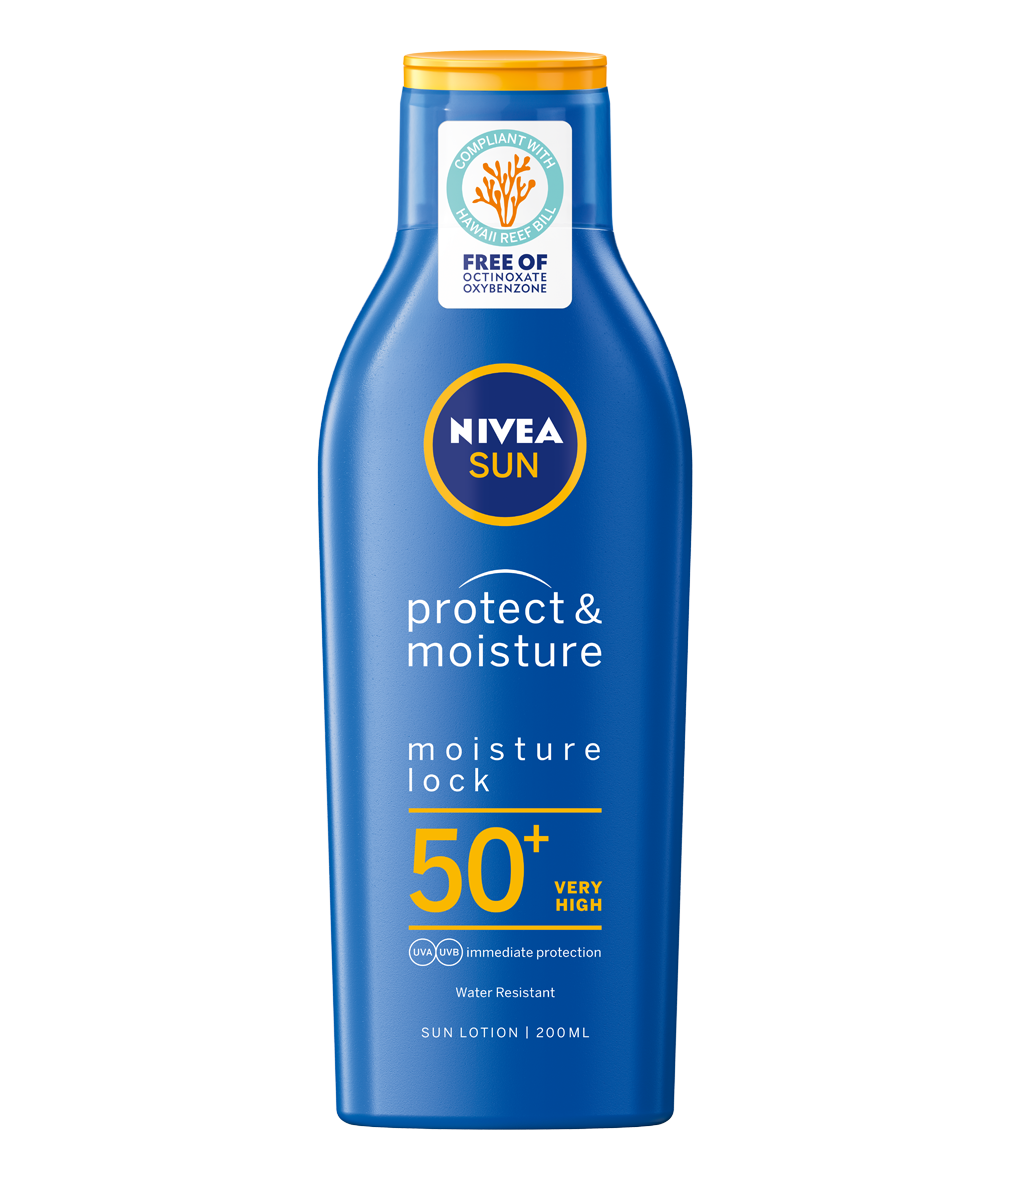 SPF recommendations 